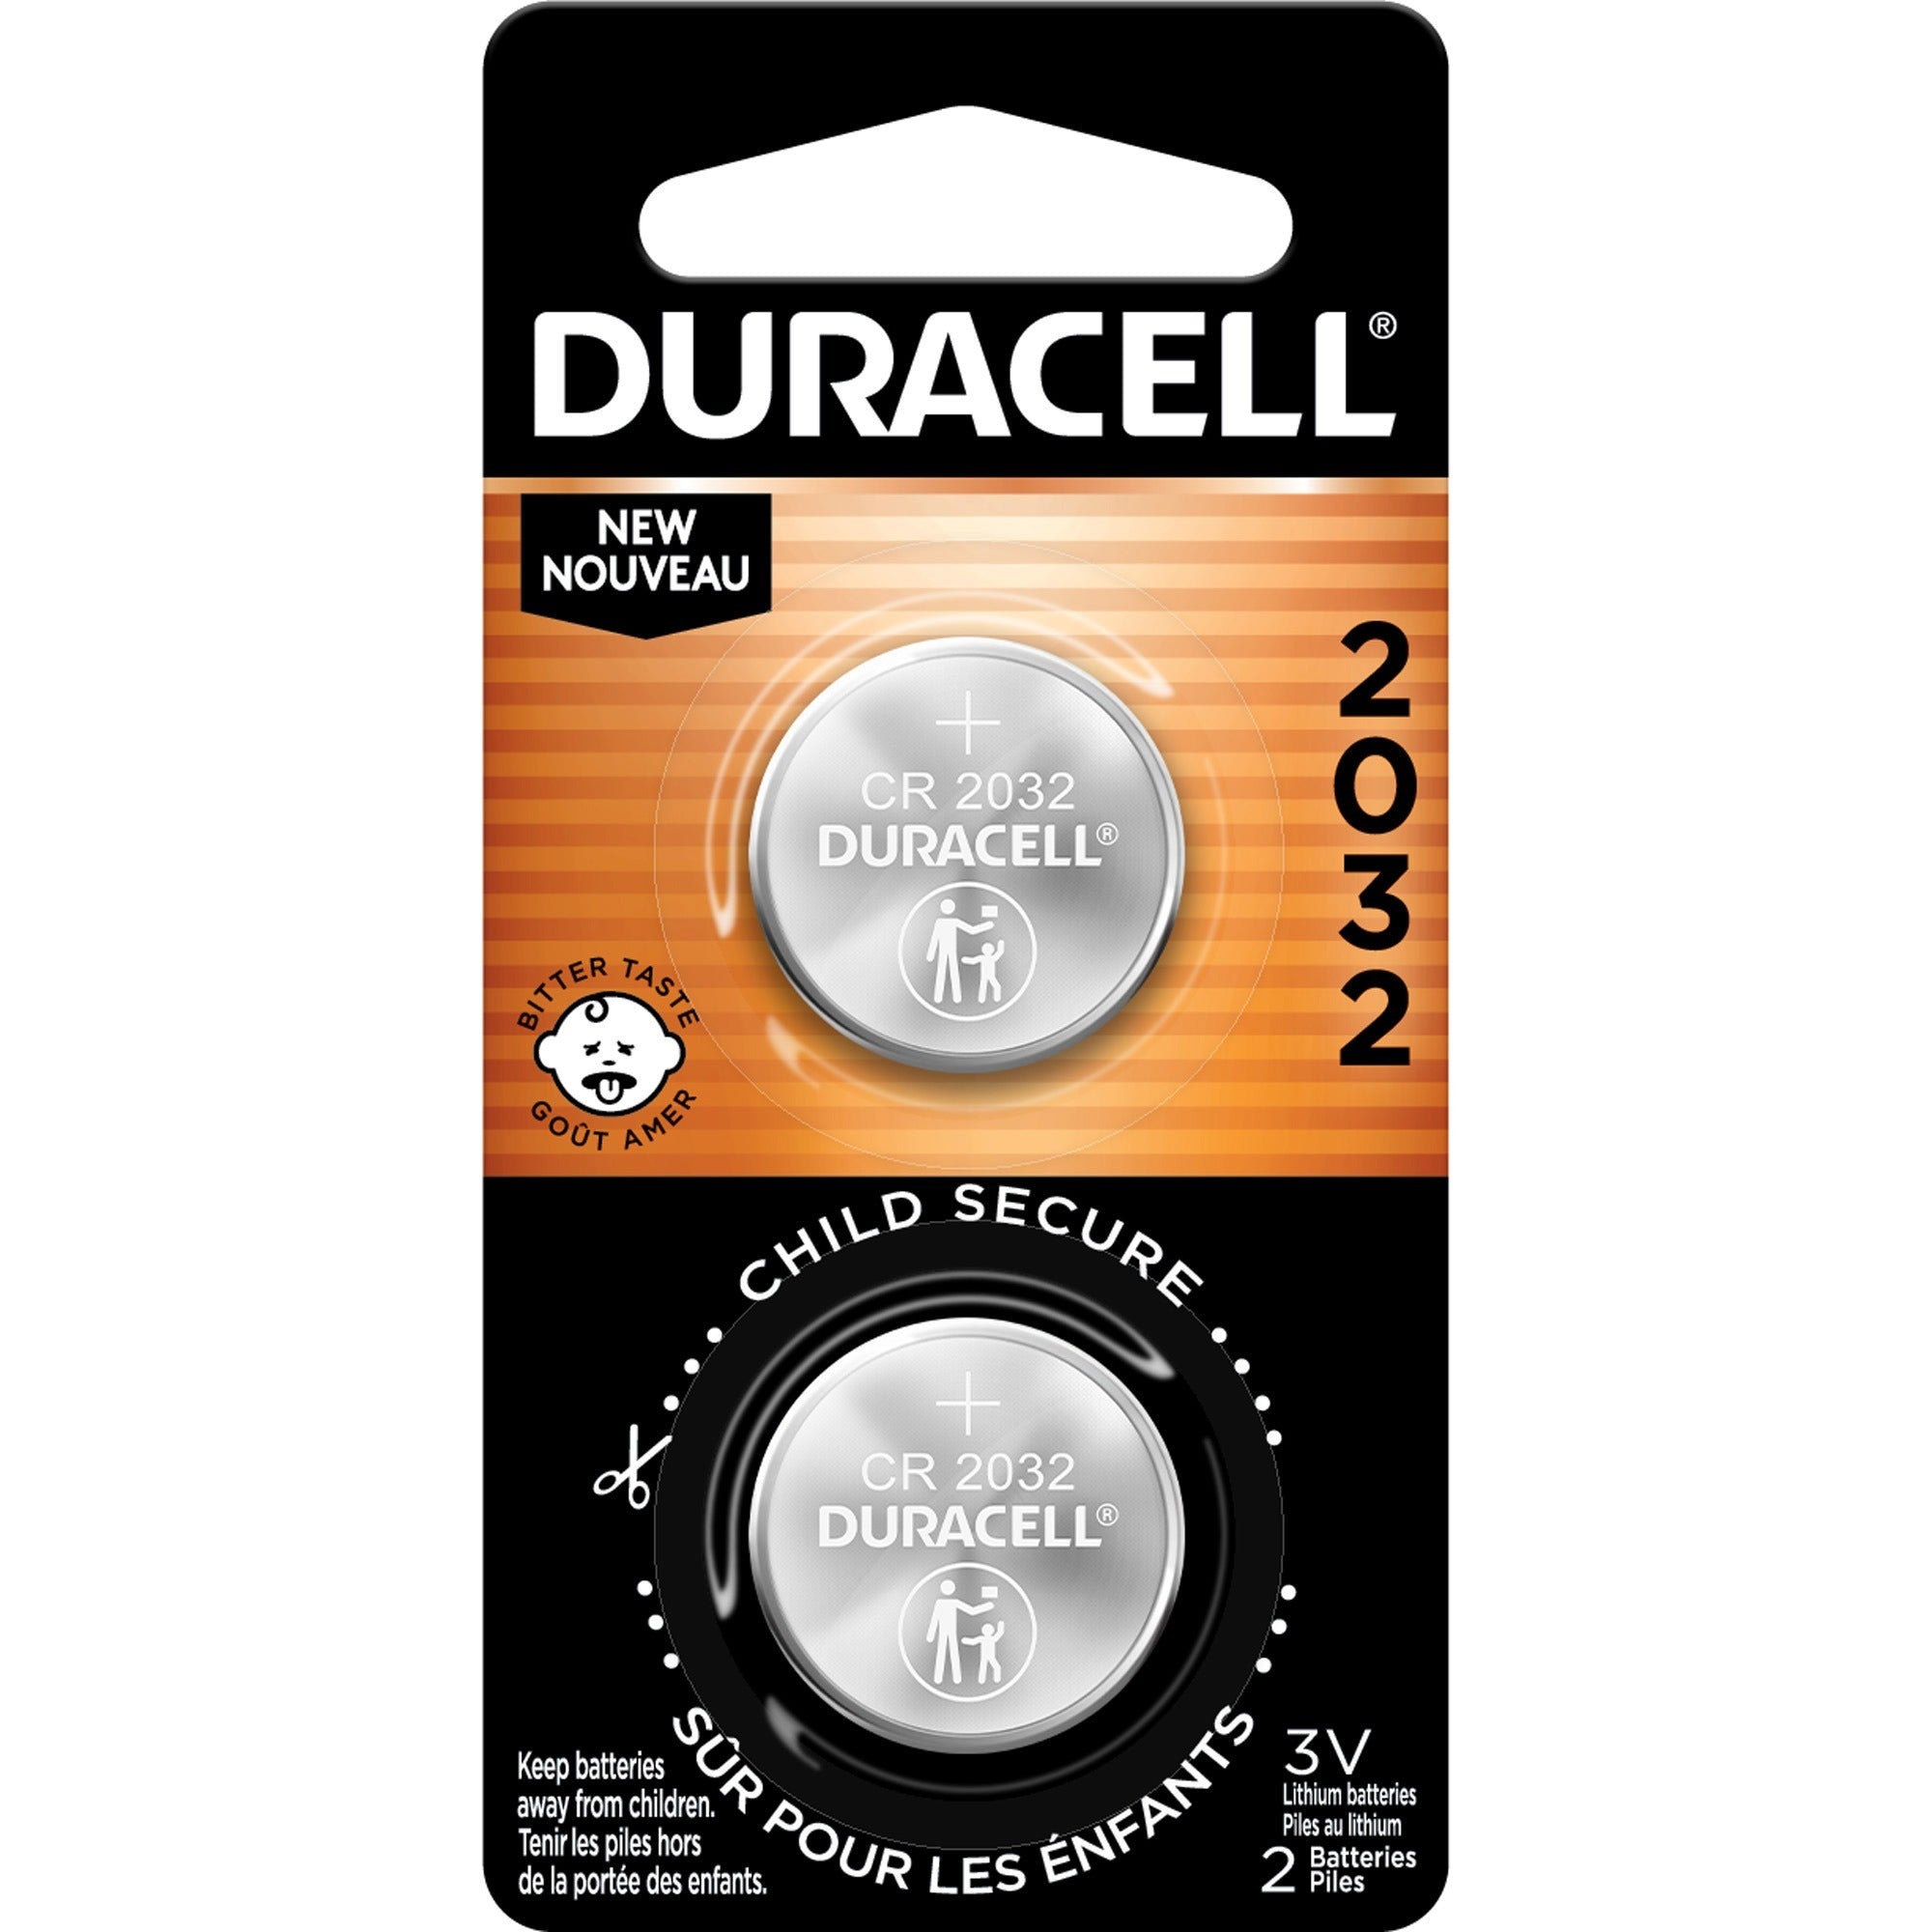 duracell-2032-lithium-button-cell-battery-2-packs-for-medical-equipment-security-device-health-fitness-monitoring-equipment-calculator-watch-keyfob-transmitter-cr2032-3-v-dc-36-carton_durdl2032b2ct - 1